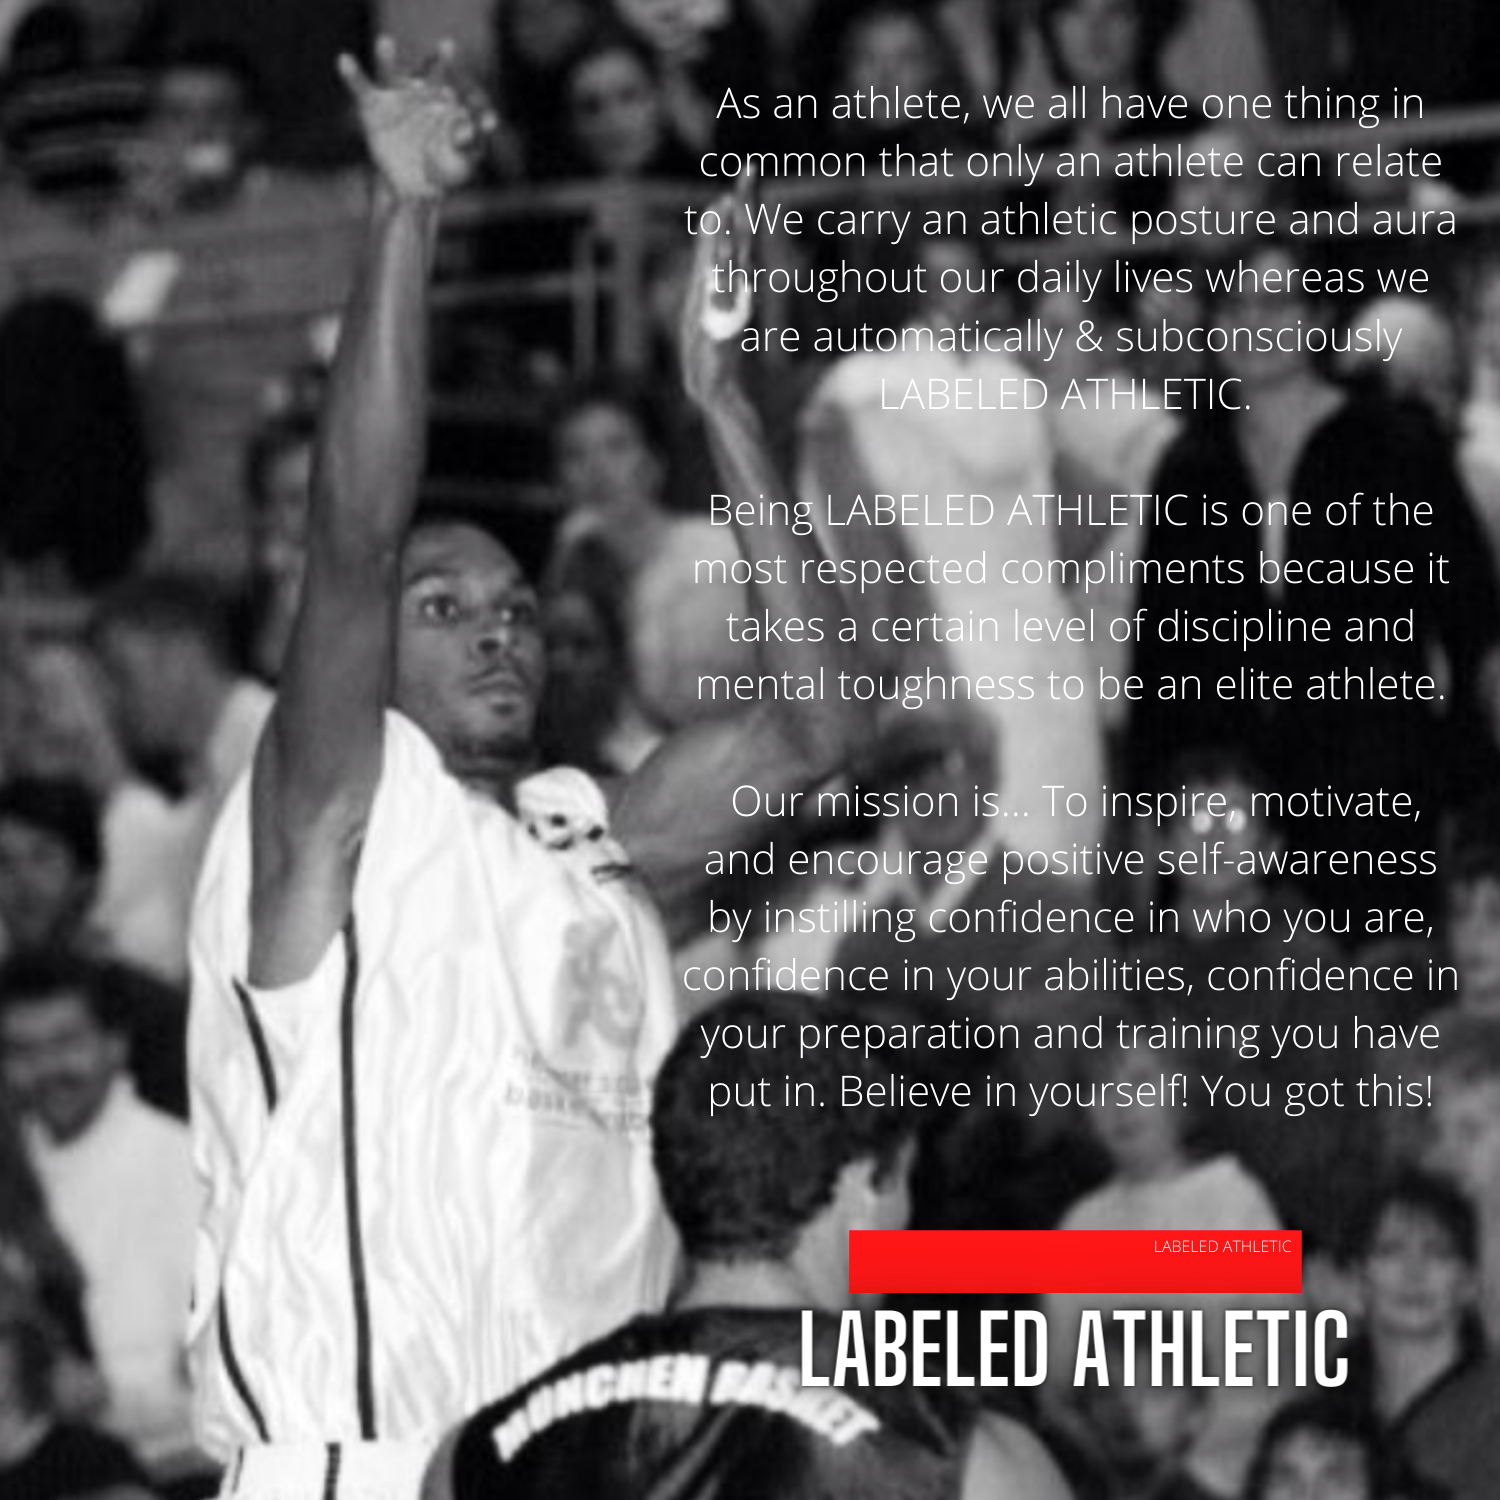 LABELED ATHLETIC